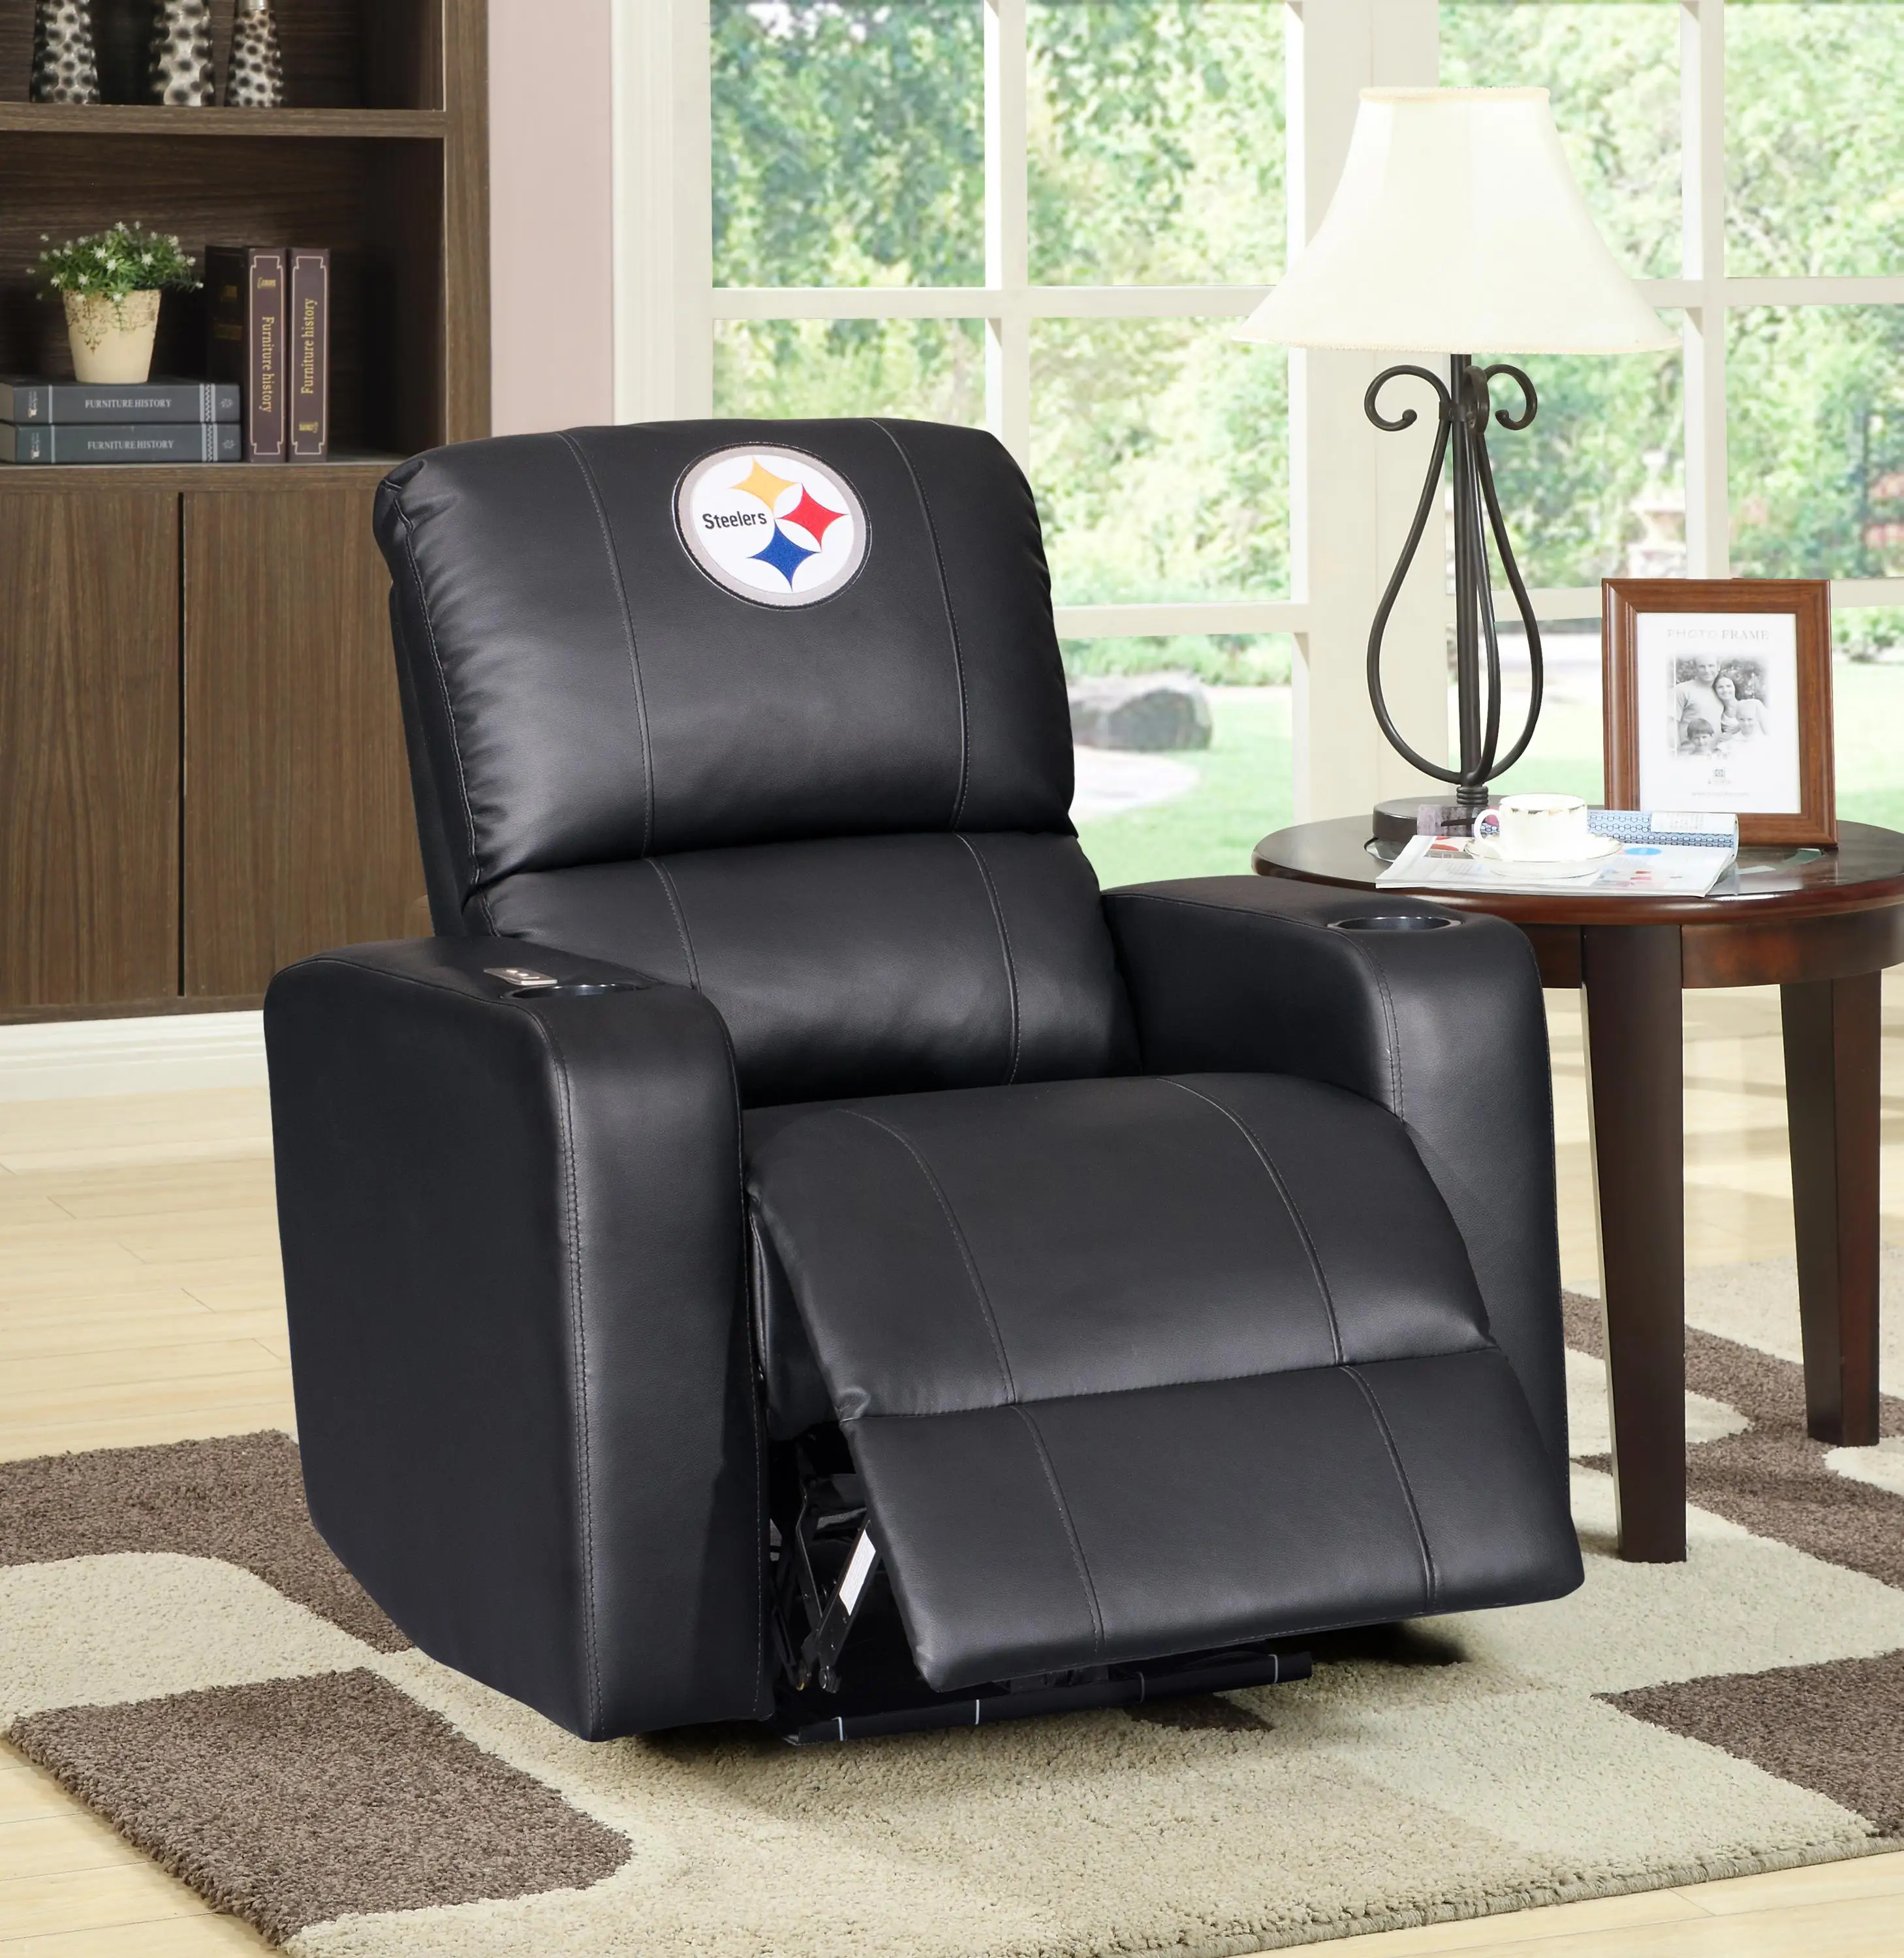 Black General Lazy Boy Recliner Sofa Chair For Sale - Buy Recliner Sofa